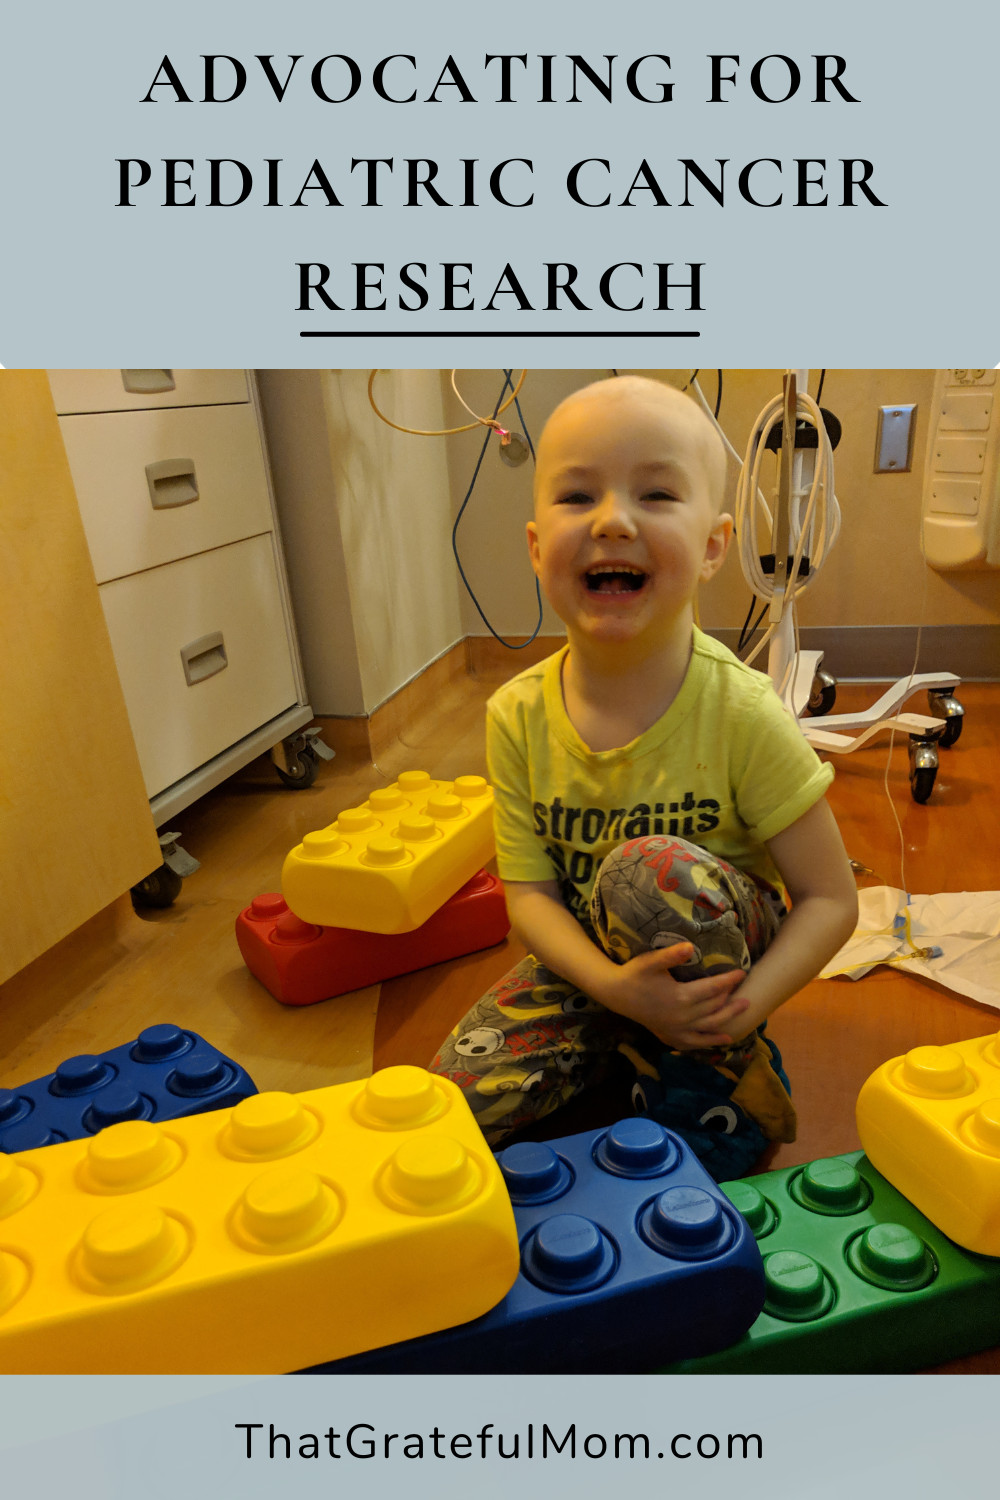 Advocating for Pediatric Cancer Research (1)